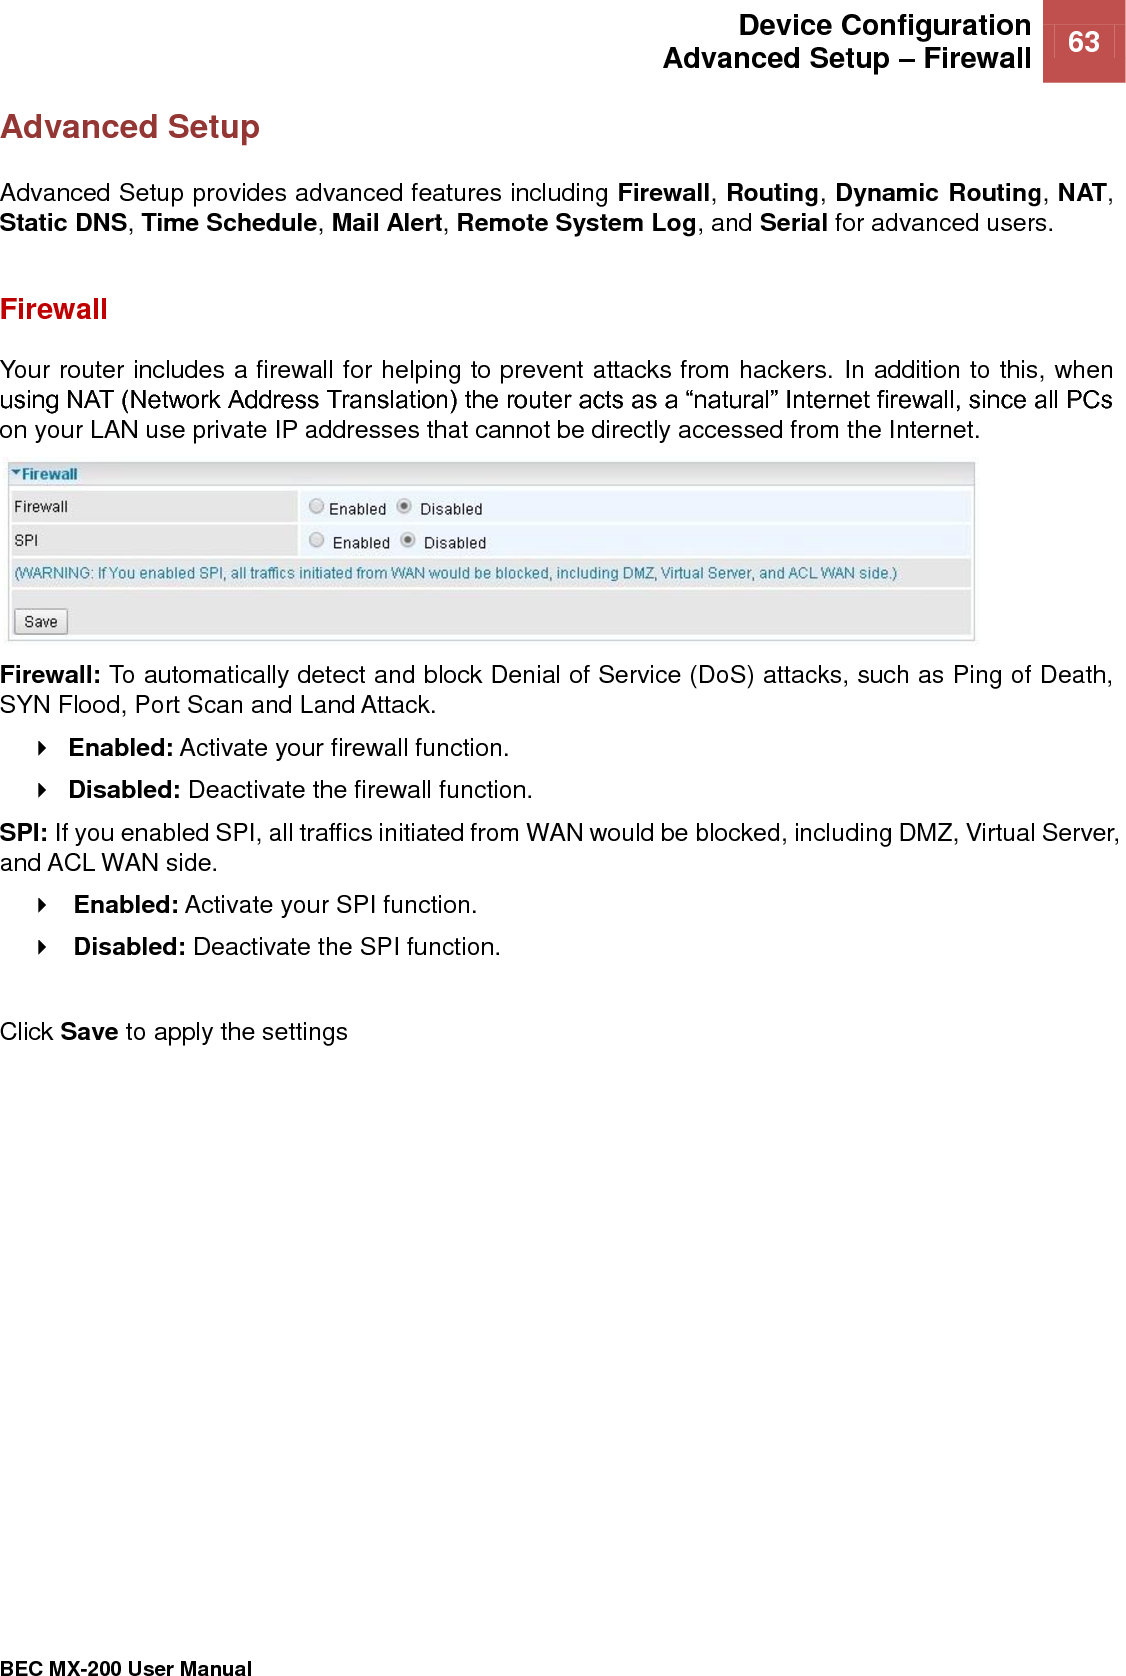  Device Configuration Advanced Setup – Firewall 63   BEC MX-200 User Manual  Advanced Setup Advanced Setup provides advanced features including Firewall, Routing, Dynamic Routing, NAT, Static DNS, Time Schedule, Mail Alert, Remote System Log, and Serial for advanced users.    Firewall Your router includes a firewall for helping to prevent attacks from hackers. In addition to this, when using NAT (Network Address Translation) the router acts as a “natural” Internet firewall, since all PCs on your LAN use private IP addresses that cannot be directly accessed from the Internet.  Firewall: To automatically detect and block Denial of Service (DoS) attacks, such as Ping of Death, SYN Flood, Port Scan and Land Attack.  Enabled: Activate your firewall function.  Disabled: Deactivate the firewall function. SPI: If you enabled SPI, all traffics initiated from WAN would be blocked, including DMZ, Virtual Server, and ACL WAN side.  Enabled: Activate your SPI function.  Disabled: Deactivate the SPI function.  Click Save to apply the settings   